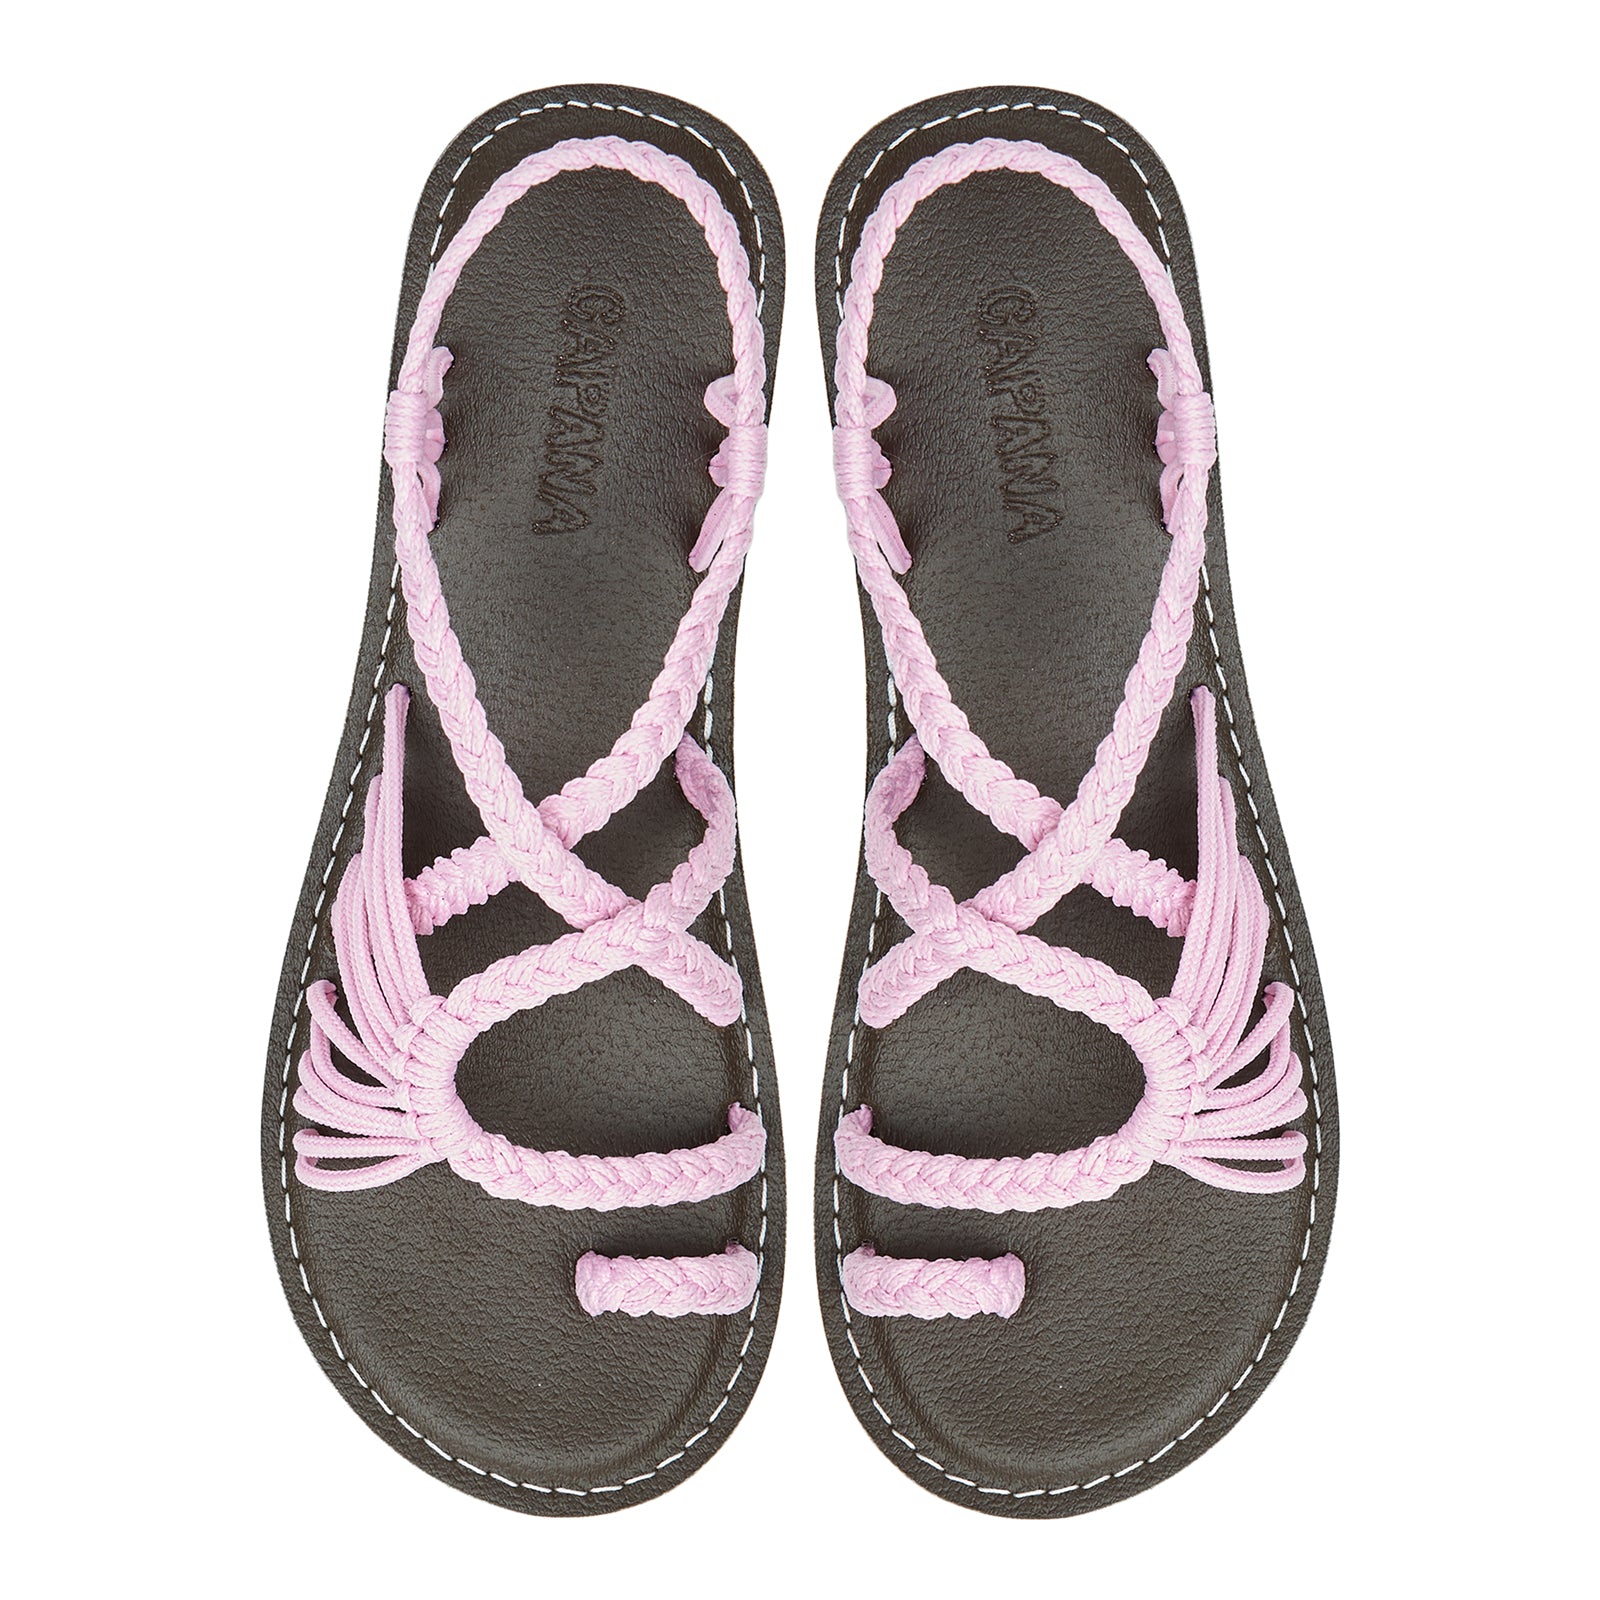 Commune Candy Rope Sandals Pink loop design Flat sandals for women